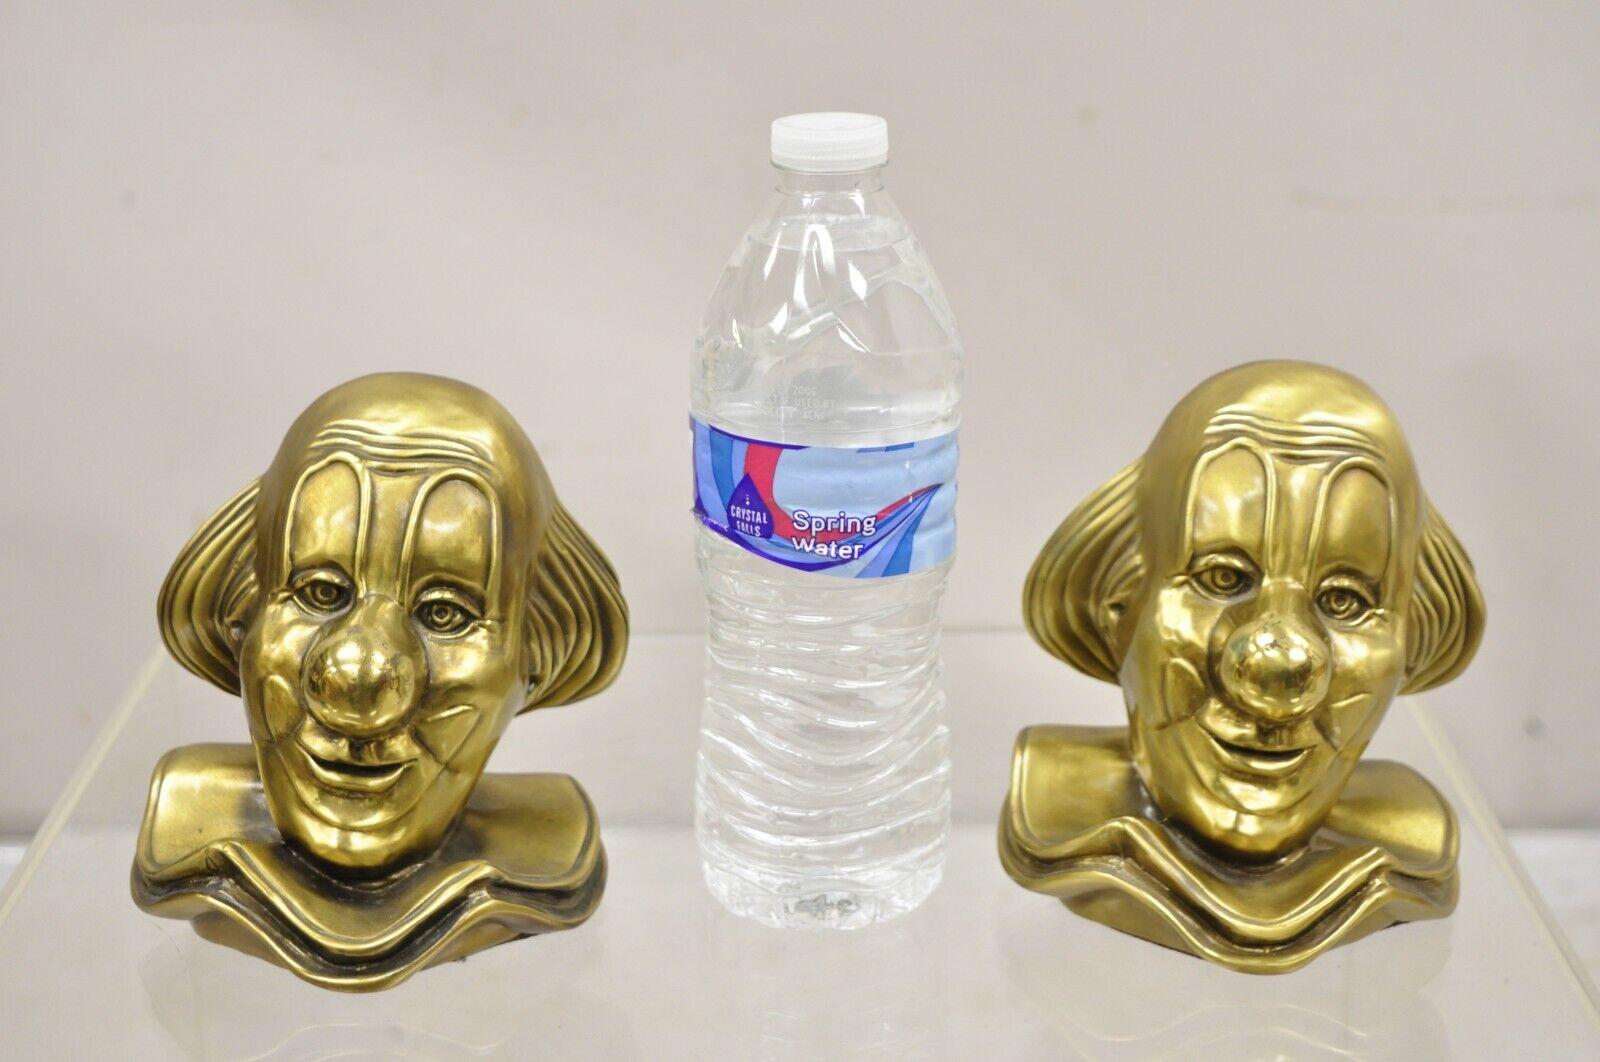 Vintage PM Craftsman Brass Figural Clown Bookends - A Pair. Circa Late 20th Century. Measurements: 5.25